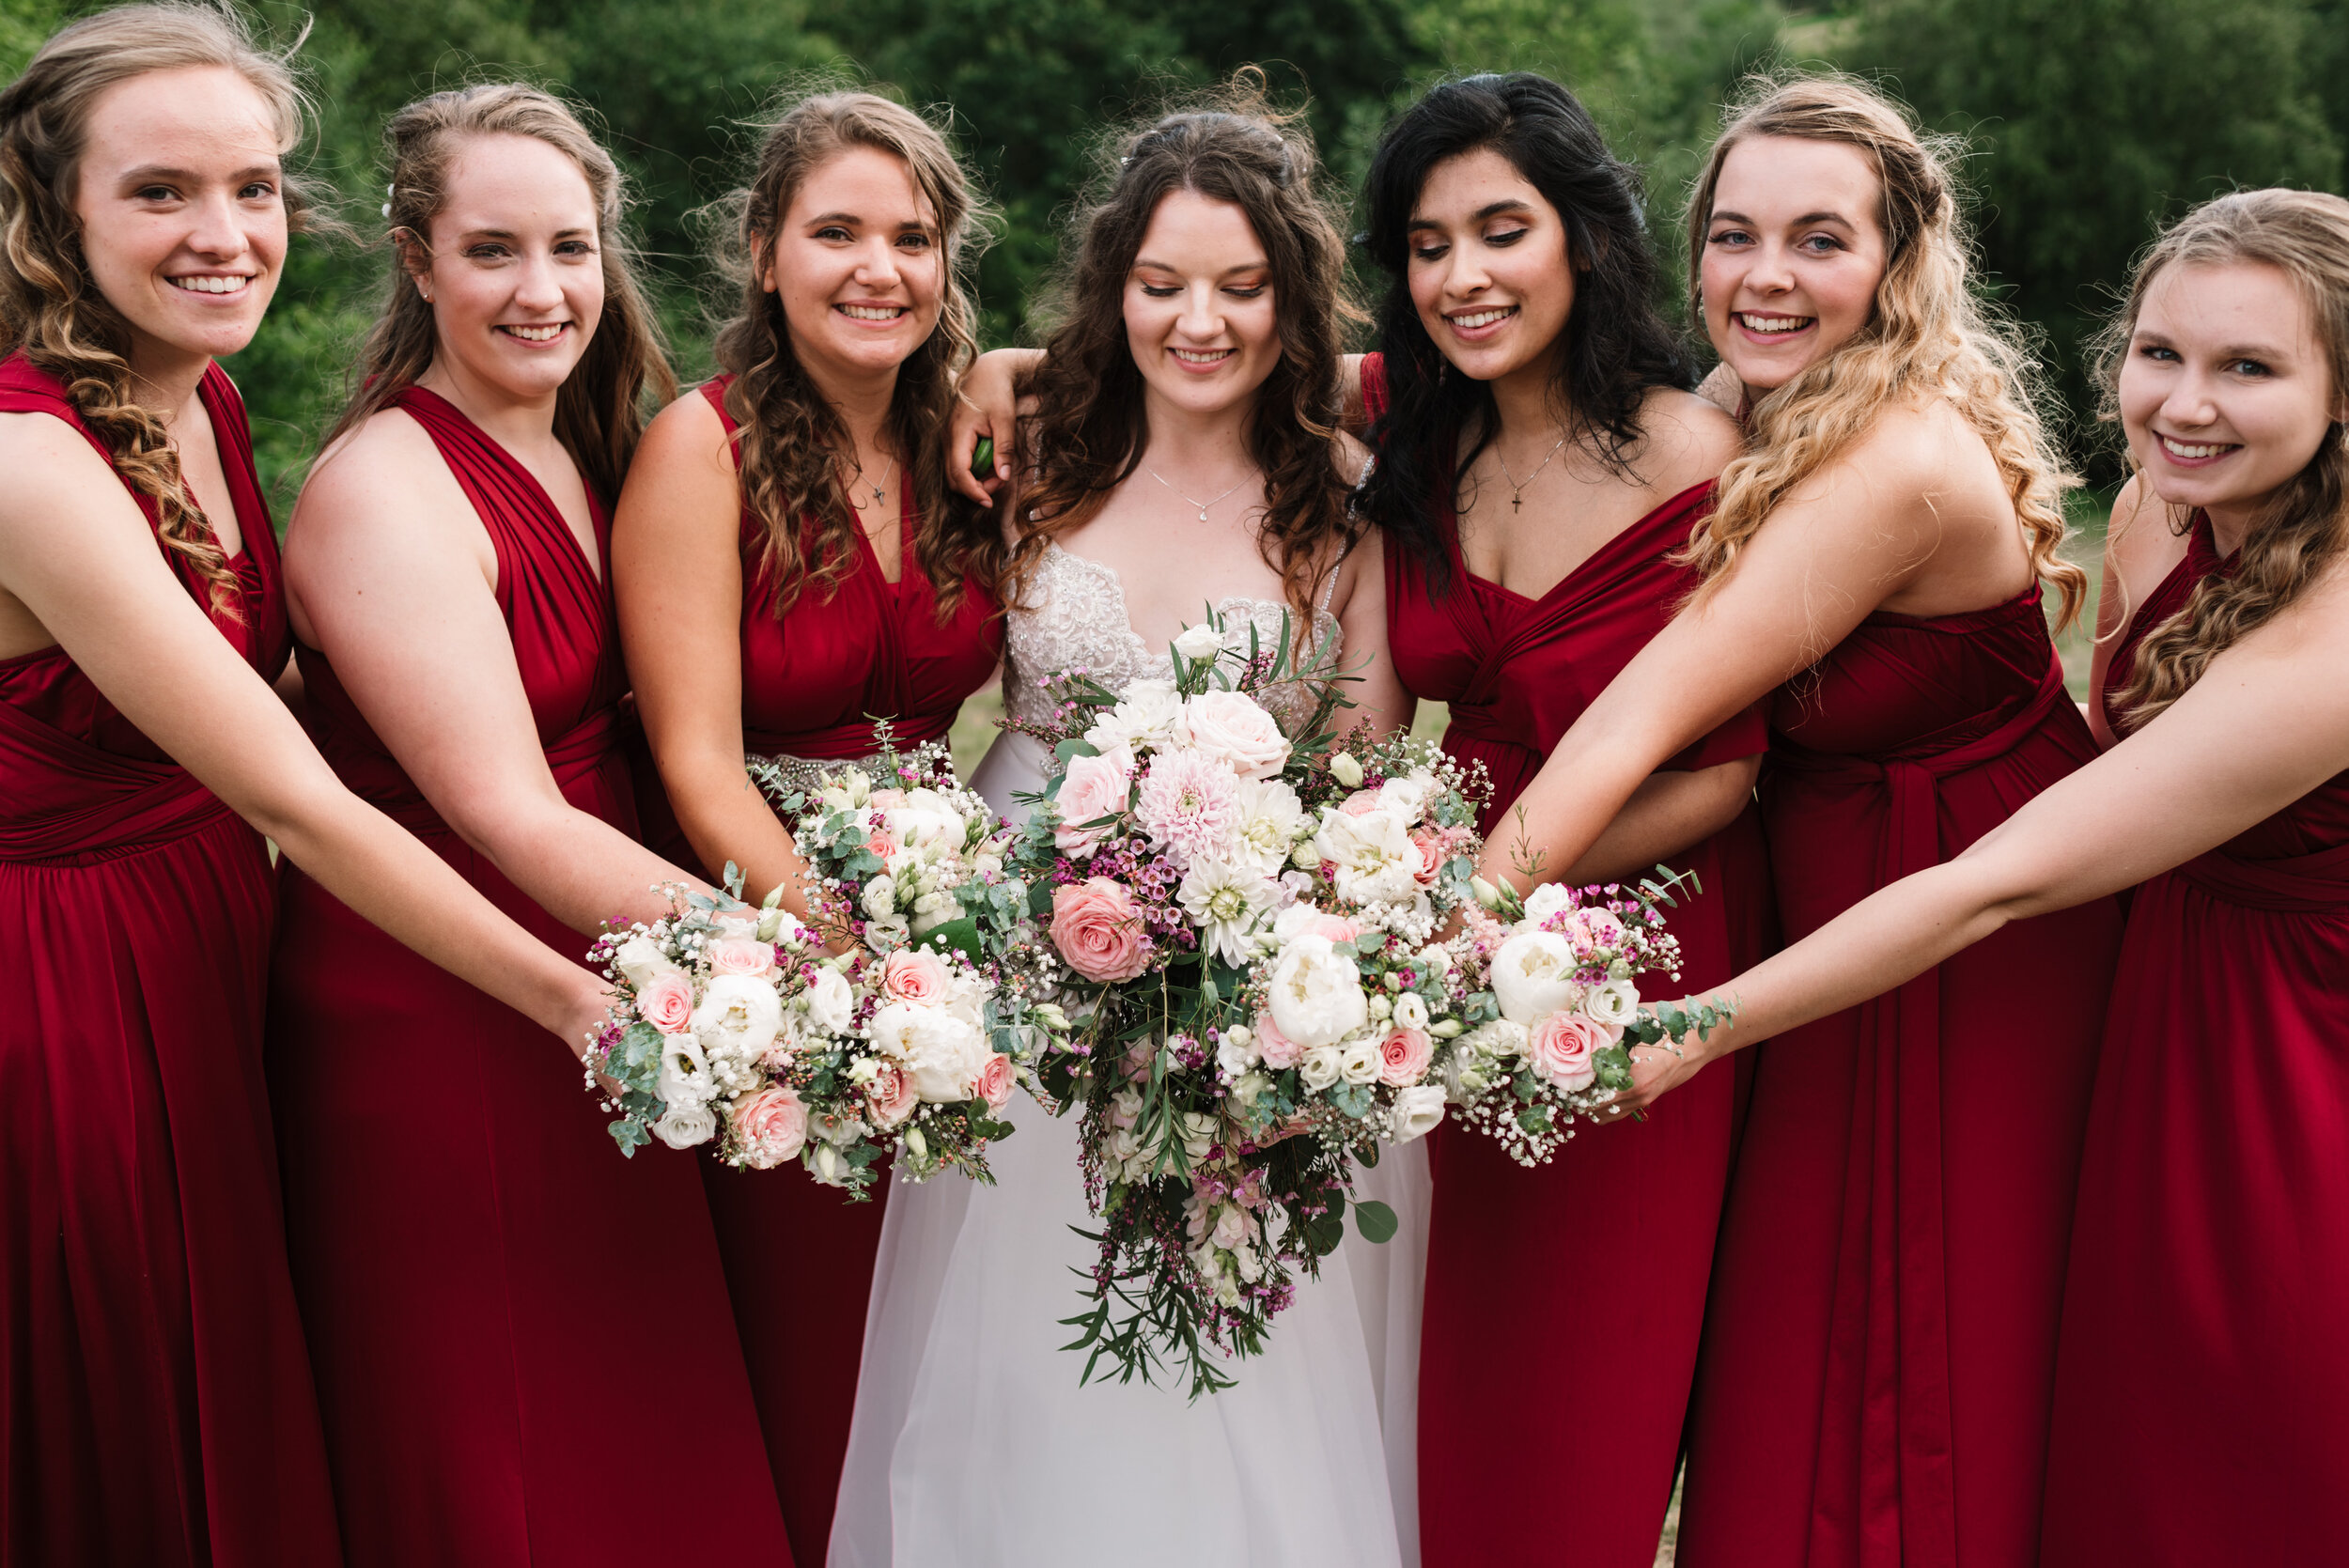 Bride and bridesmaids wearing red dresses on wedding day with bouquets